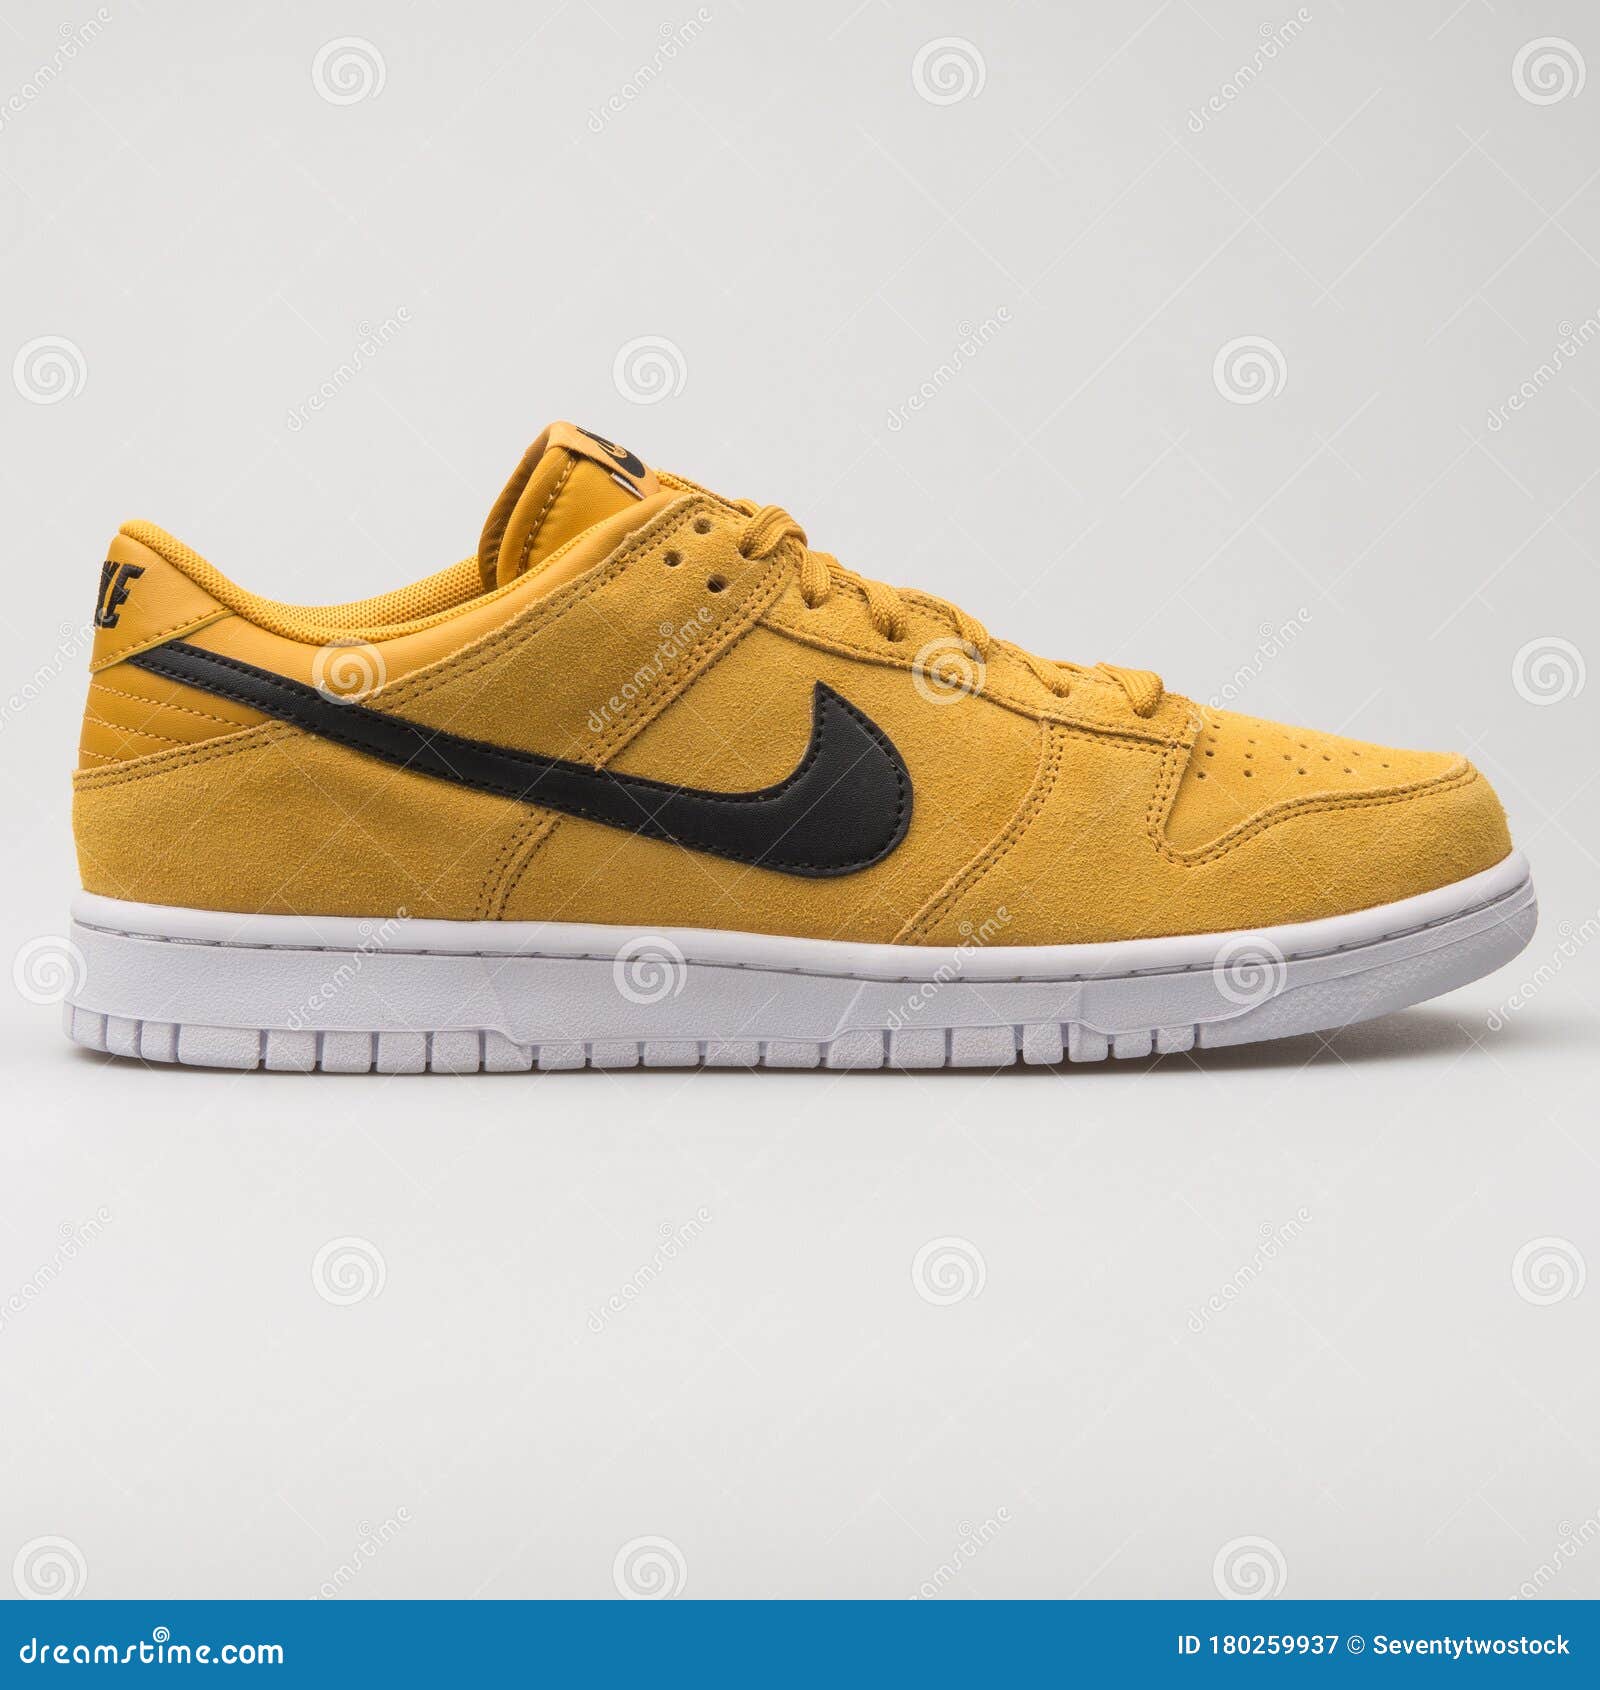 Nike Dunk Low Yellow and Black Sneaker Editorial Photography - Image item, athletic: 180259937